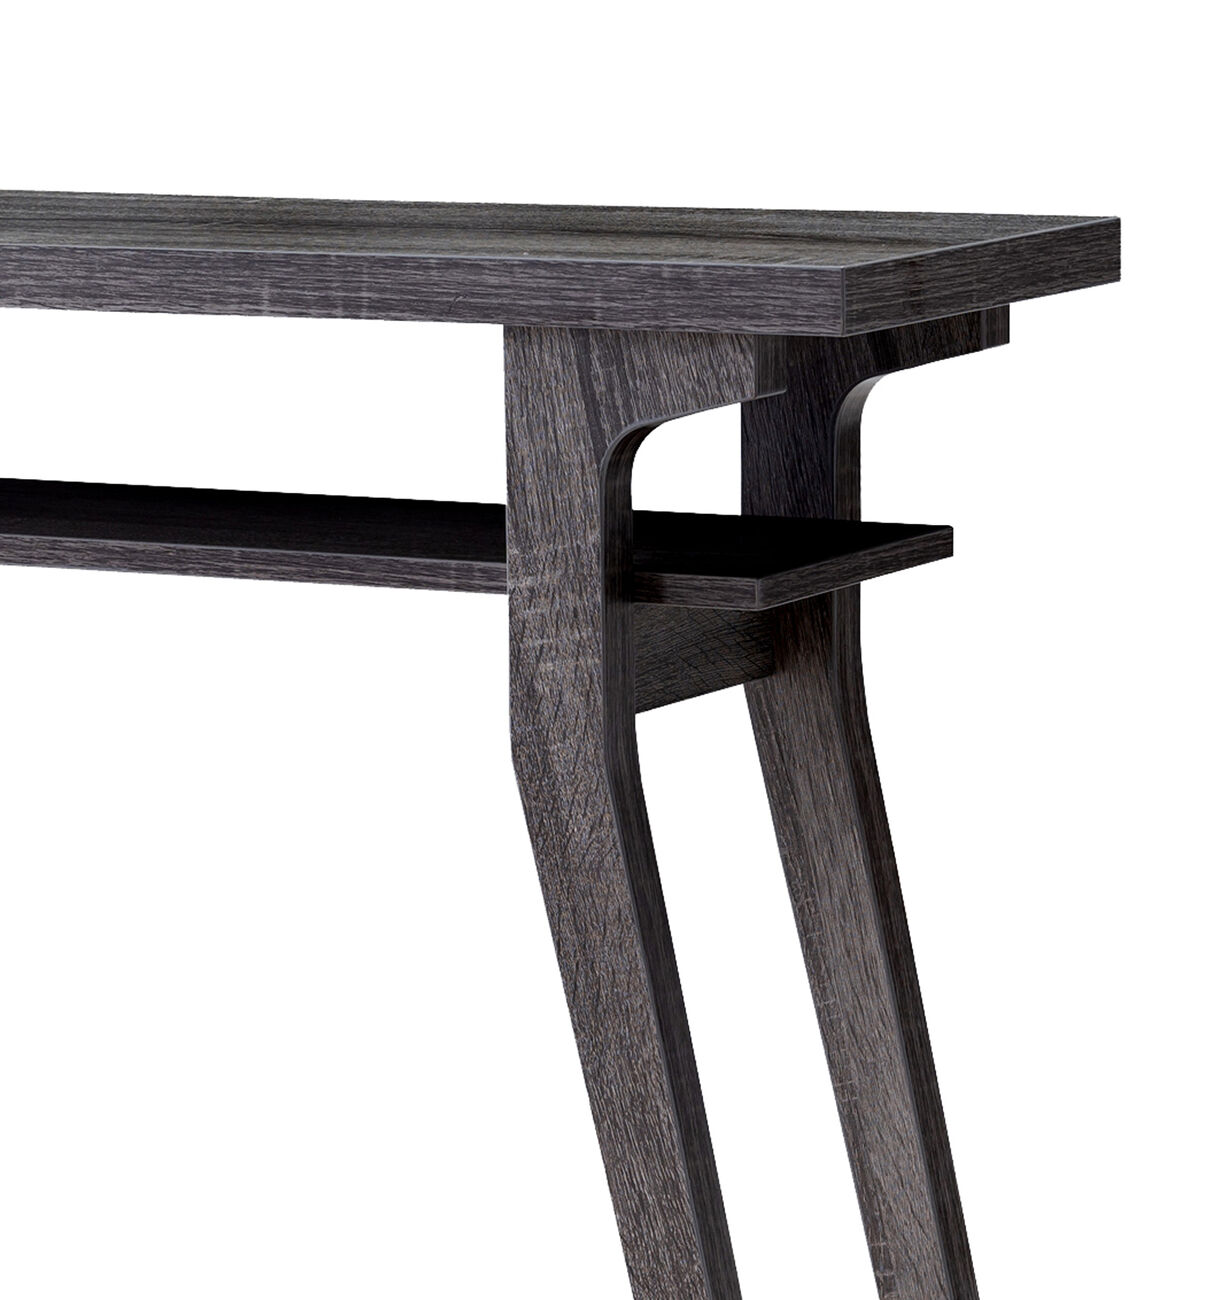 2 Tier Wooden Console Table with Slanted Leg Support, Distressed Gray